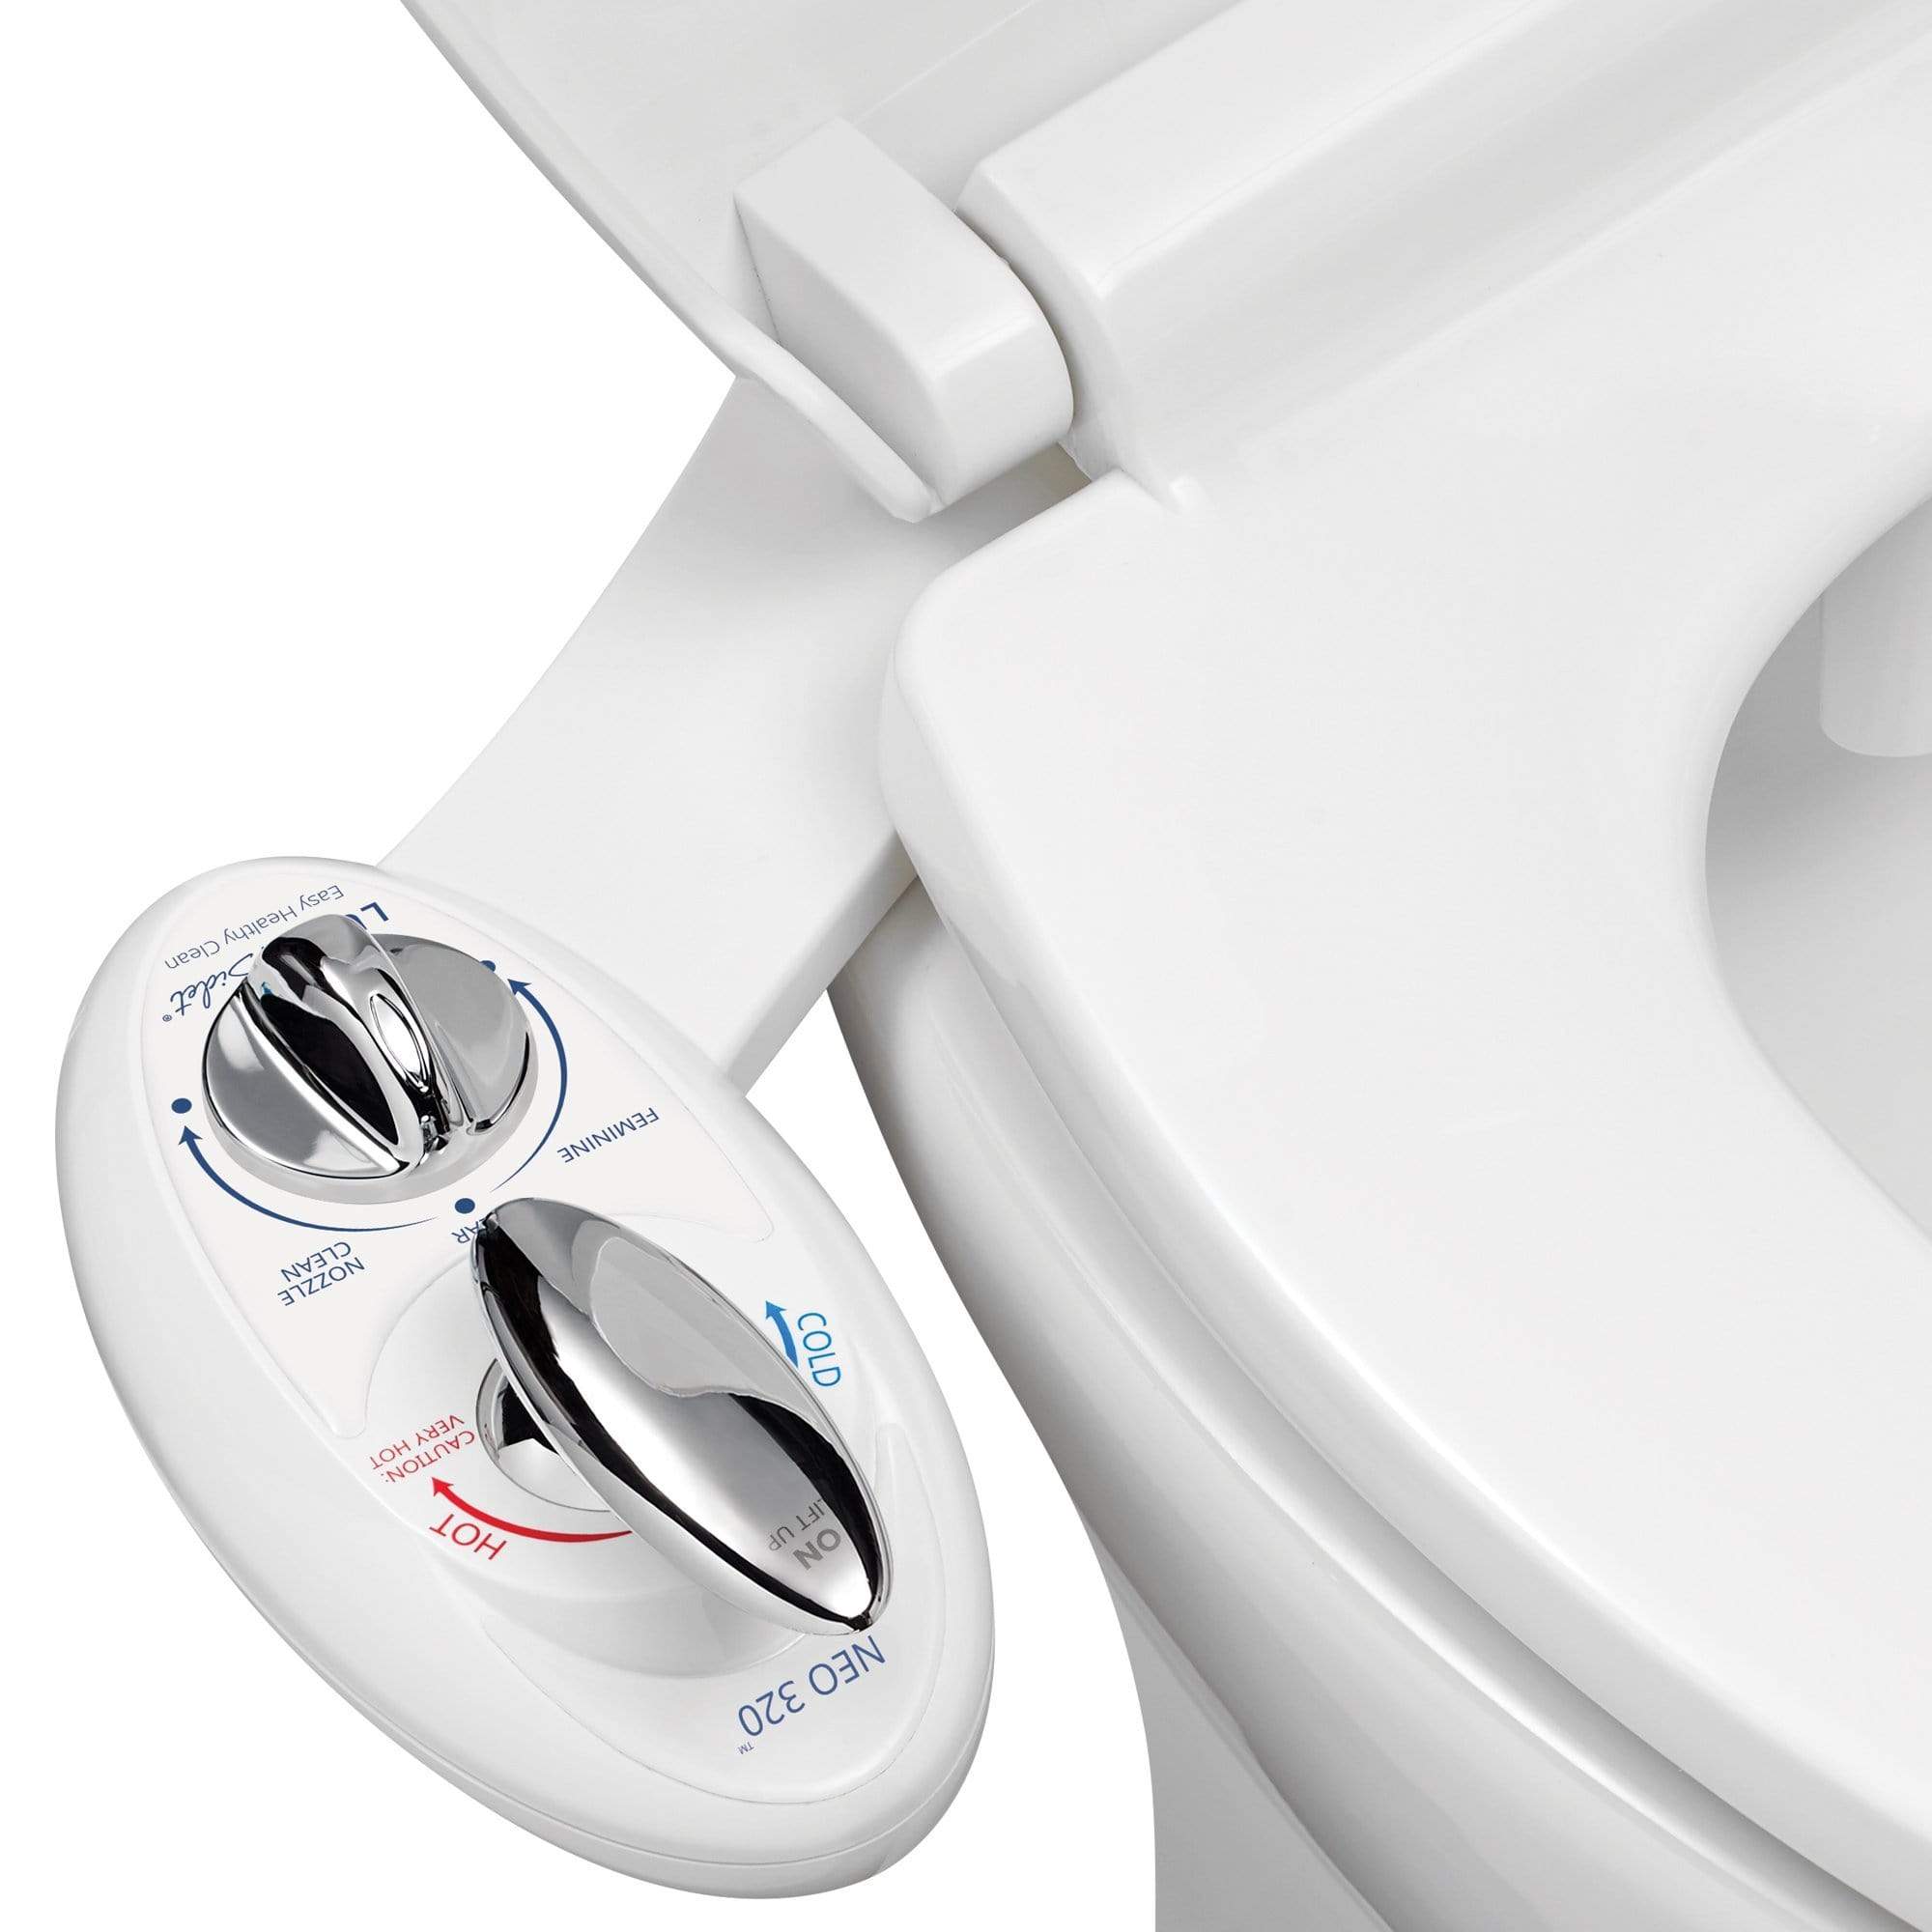 NEO 320: Imperfect Packaging - NEO 320 White installed on a toilet, open lid